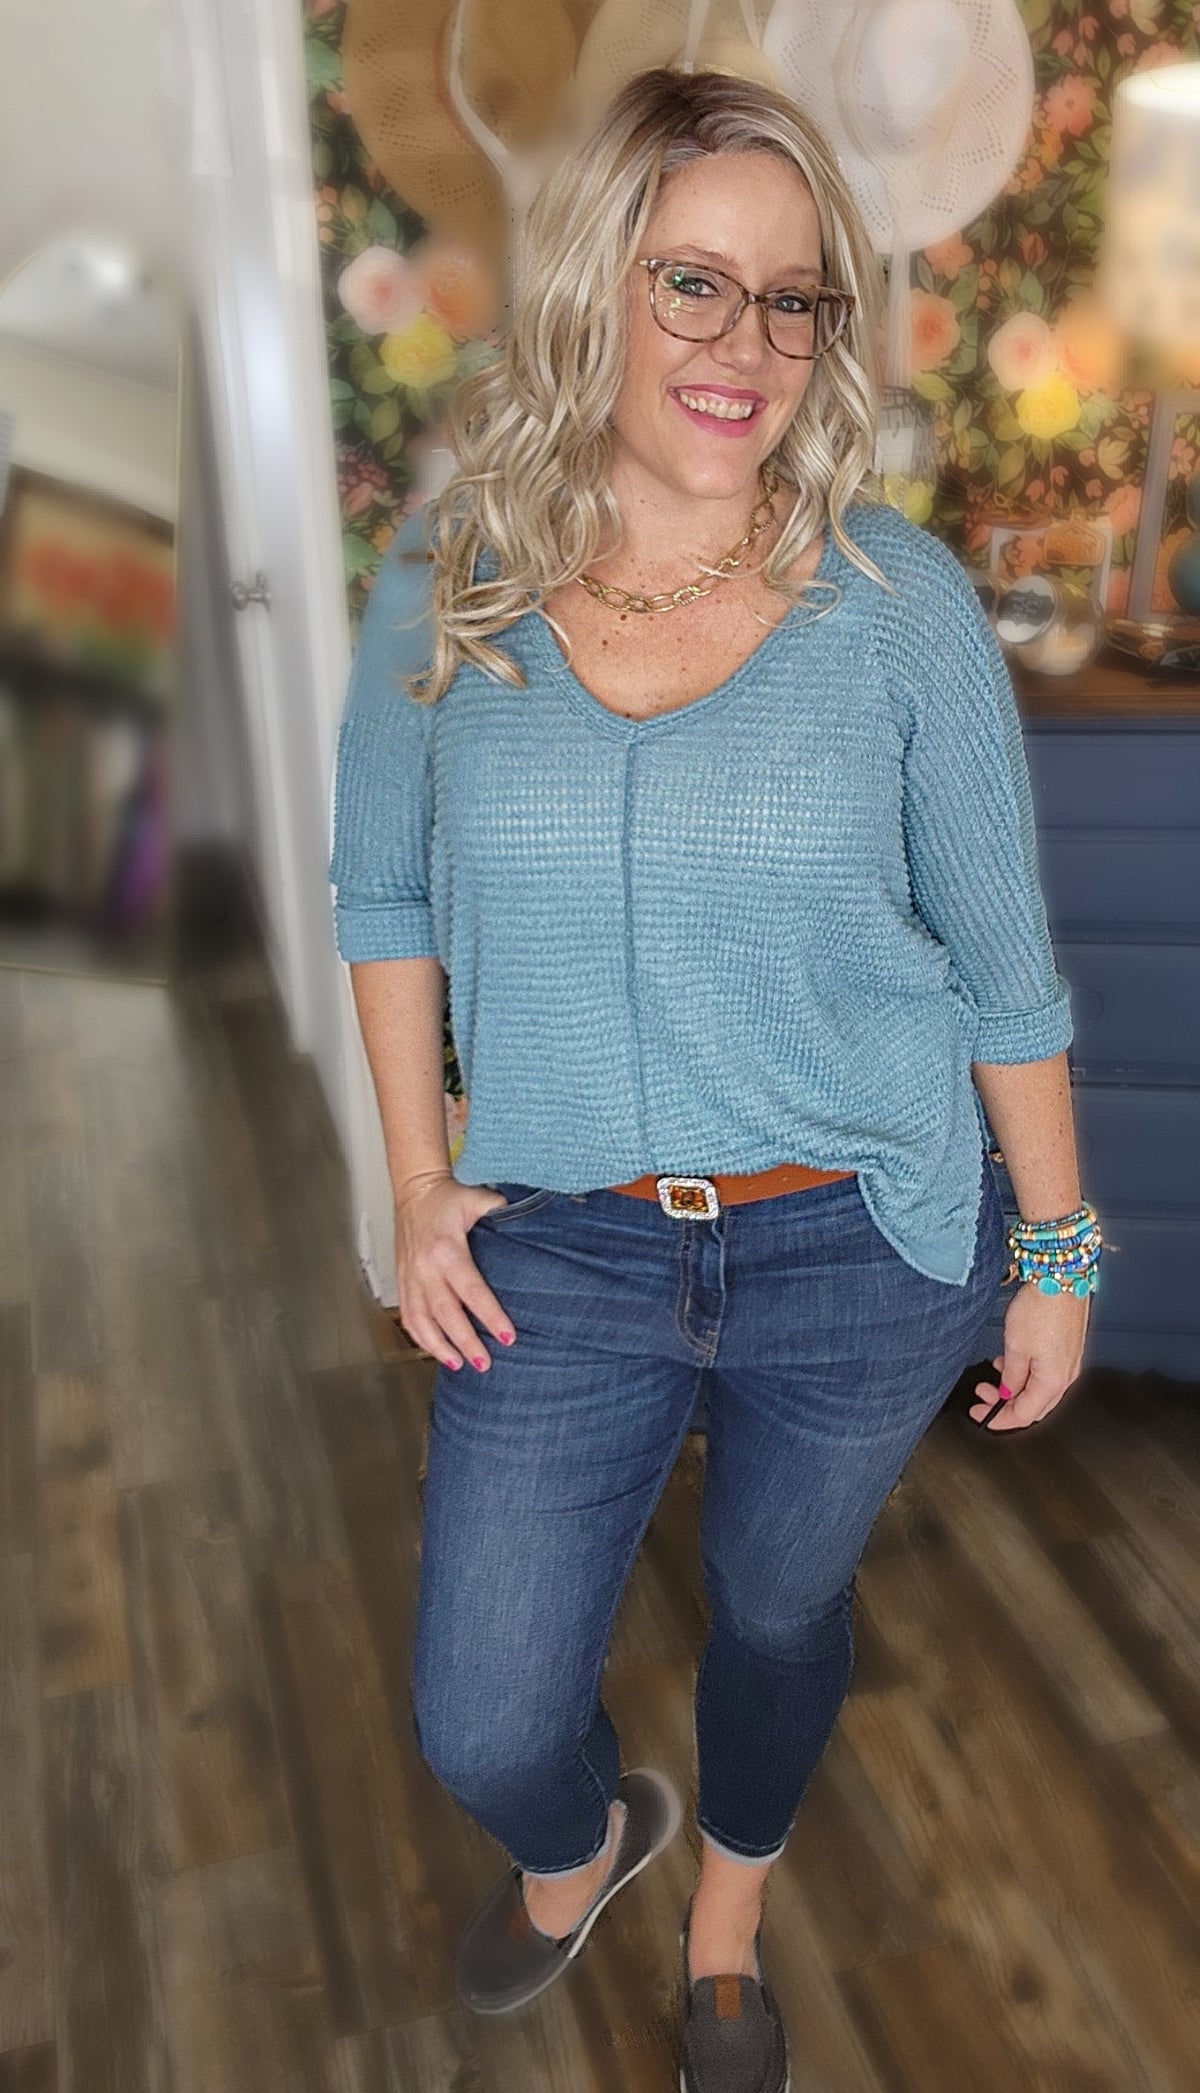 Dolly 3/4 Sleeve Loose Knit Blouse Sm - 3XL in Teal